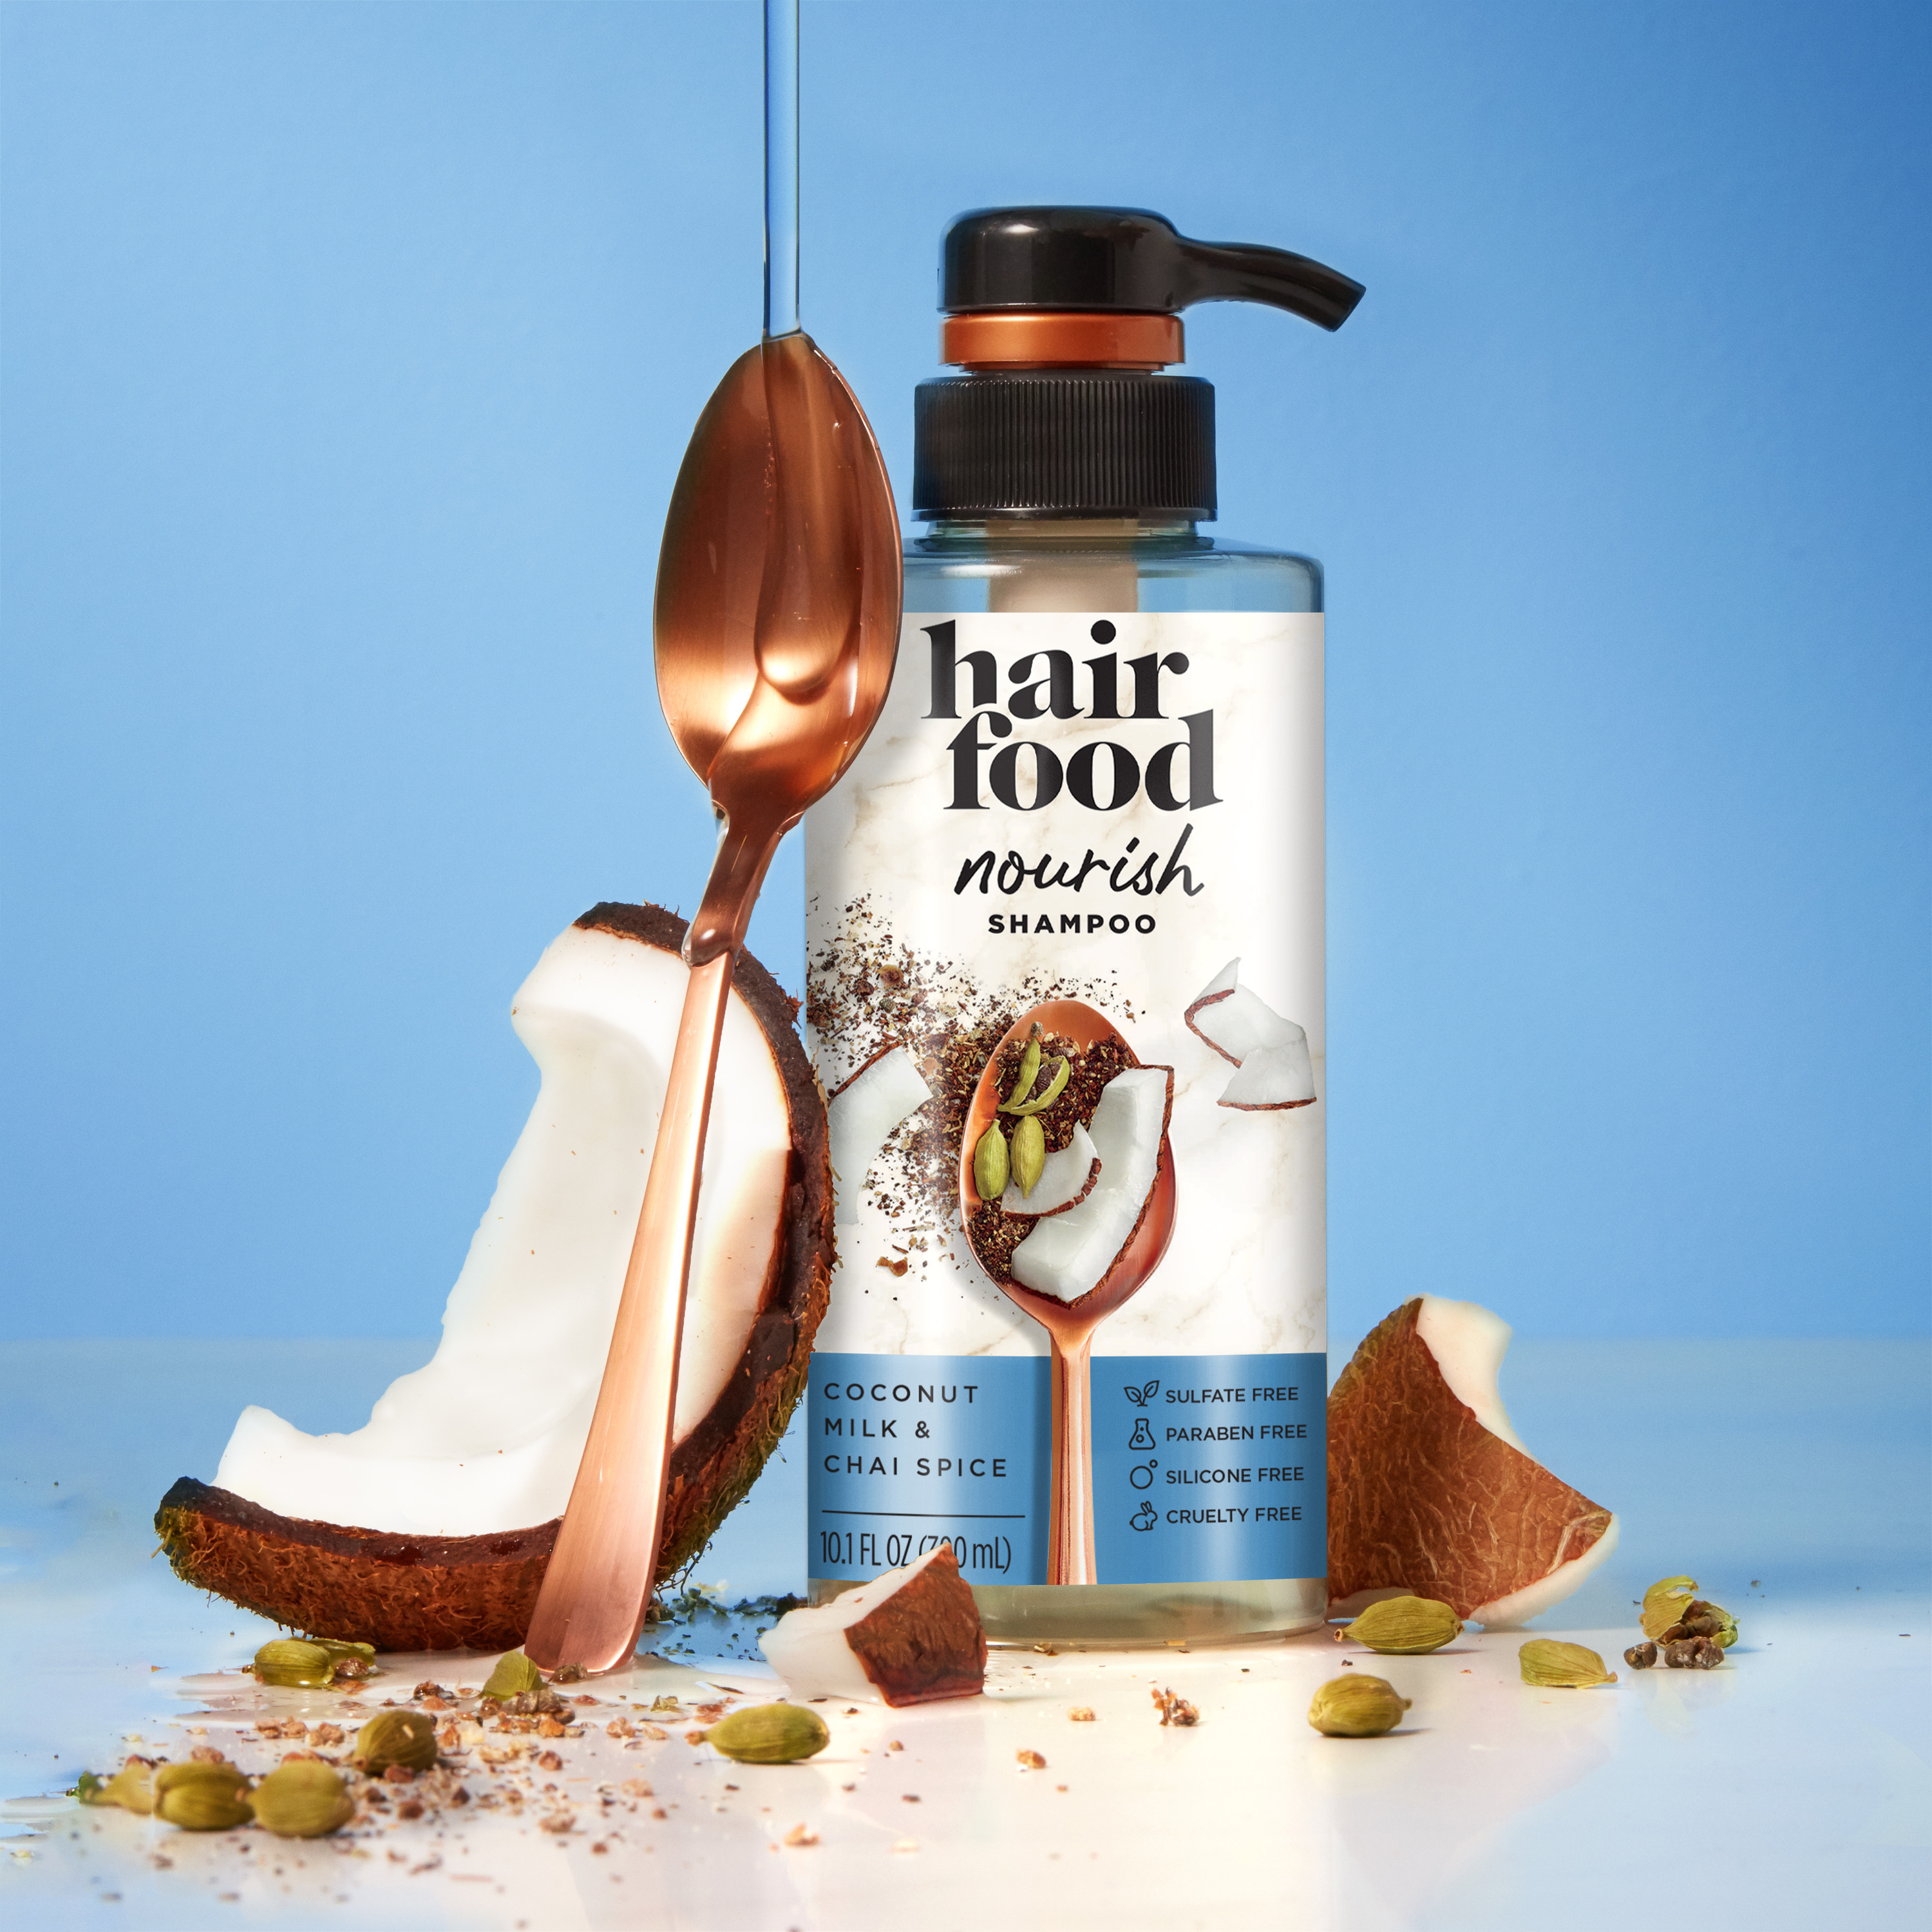 Hair Food Nourishing Shampoo, Coconut and Chai Spice, 10.1 fl oz for All Hair Types - image 5 of 11